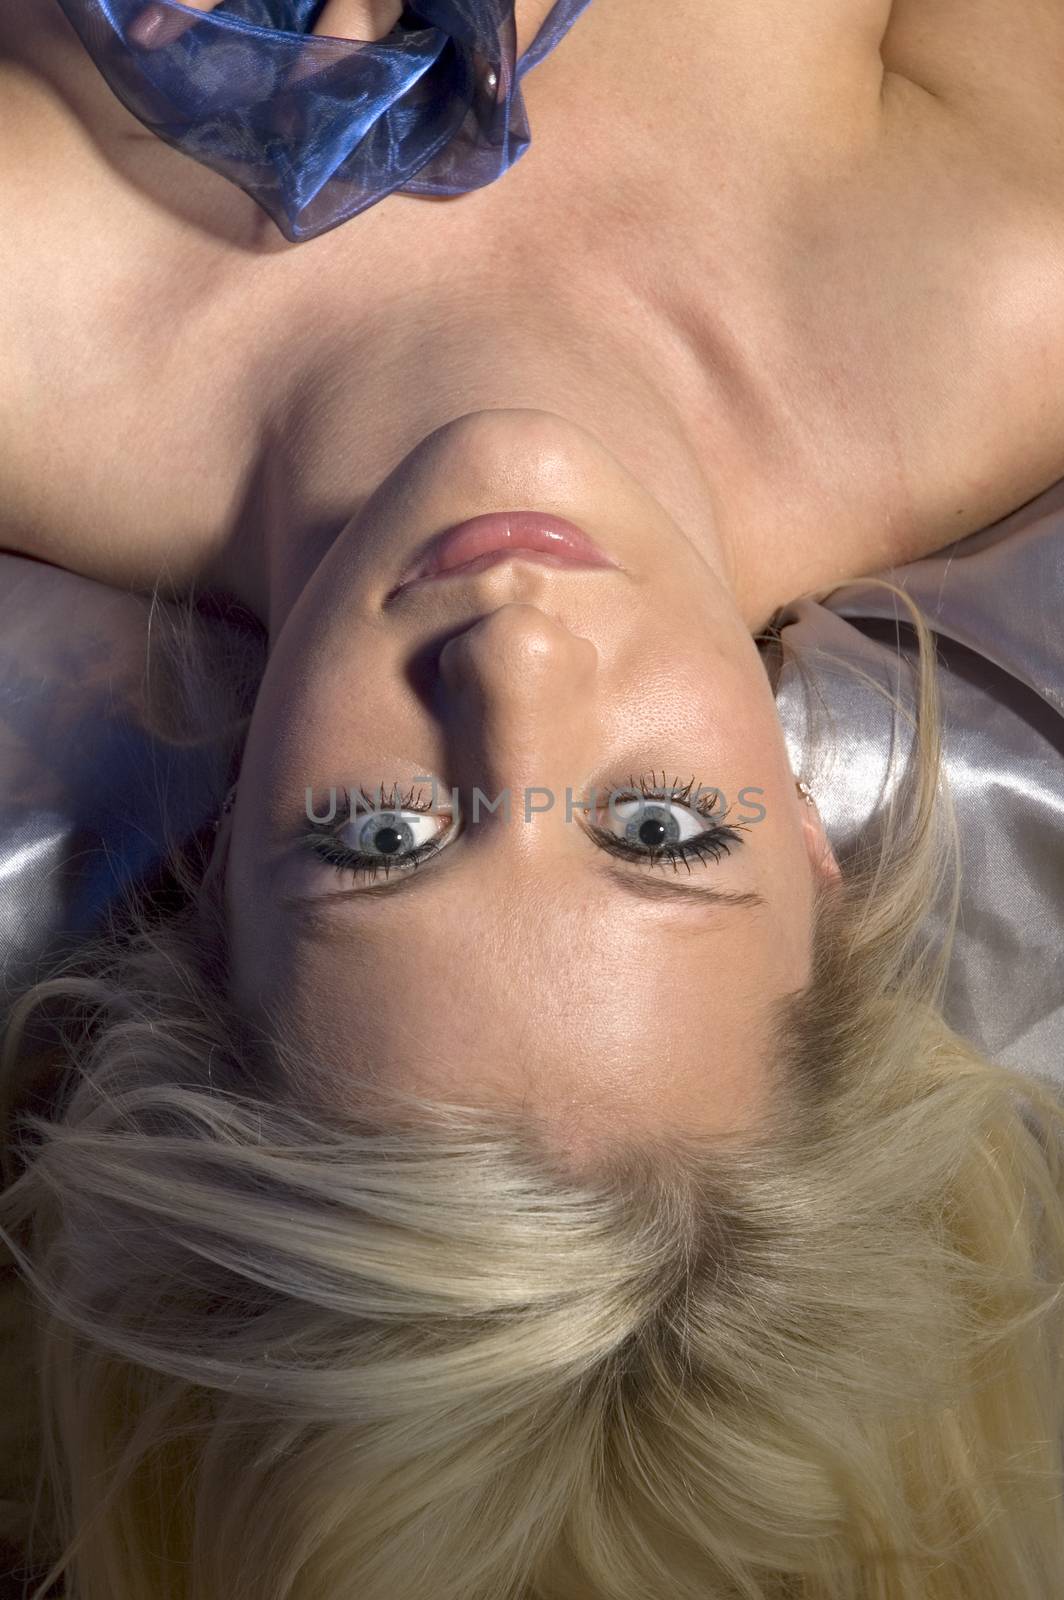 Upside down image of blonde woman's face